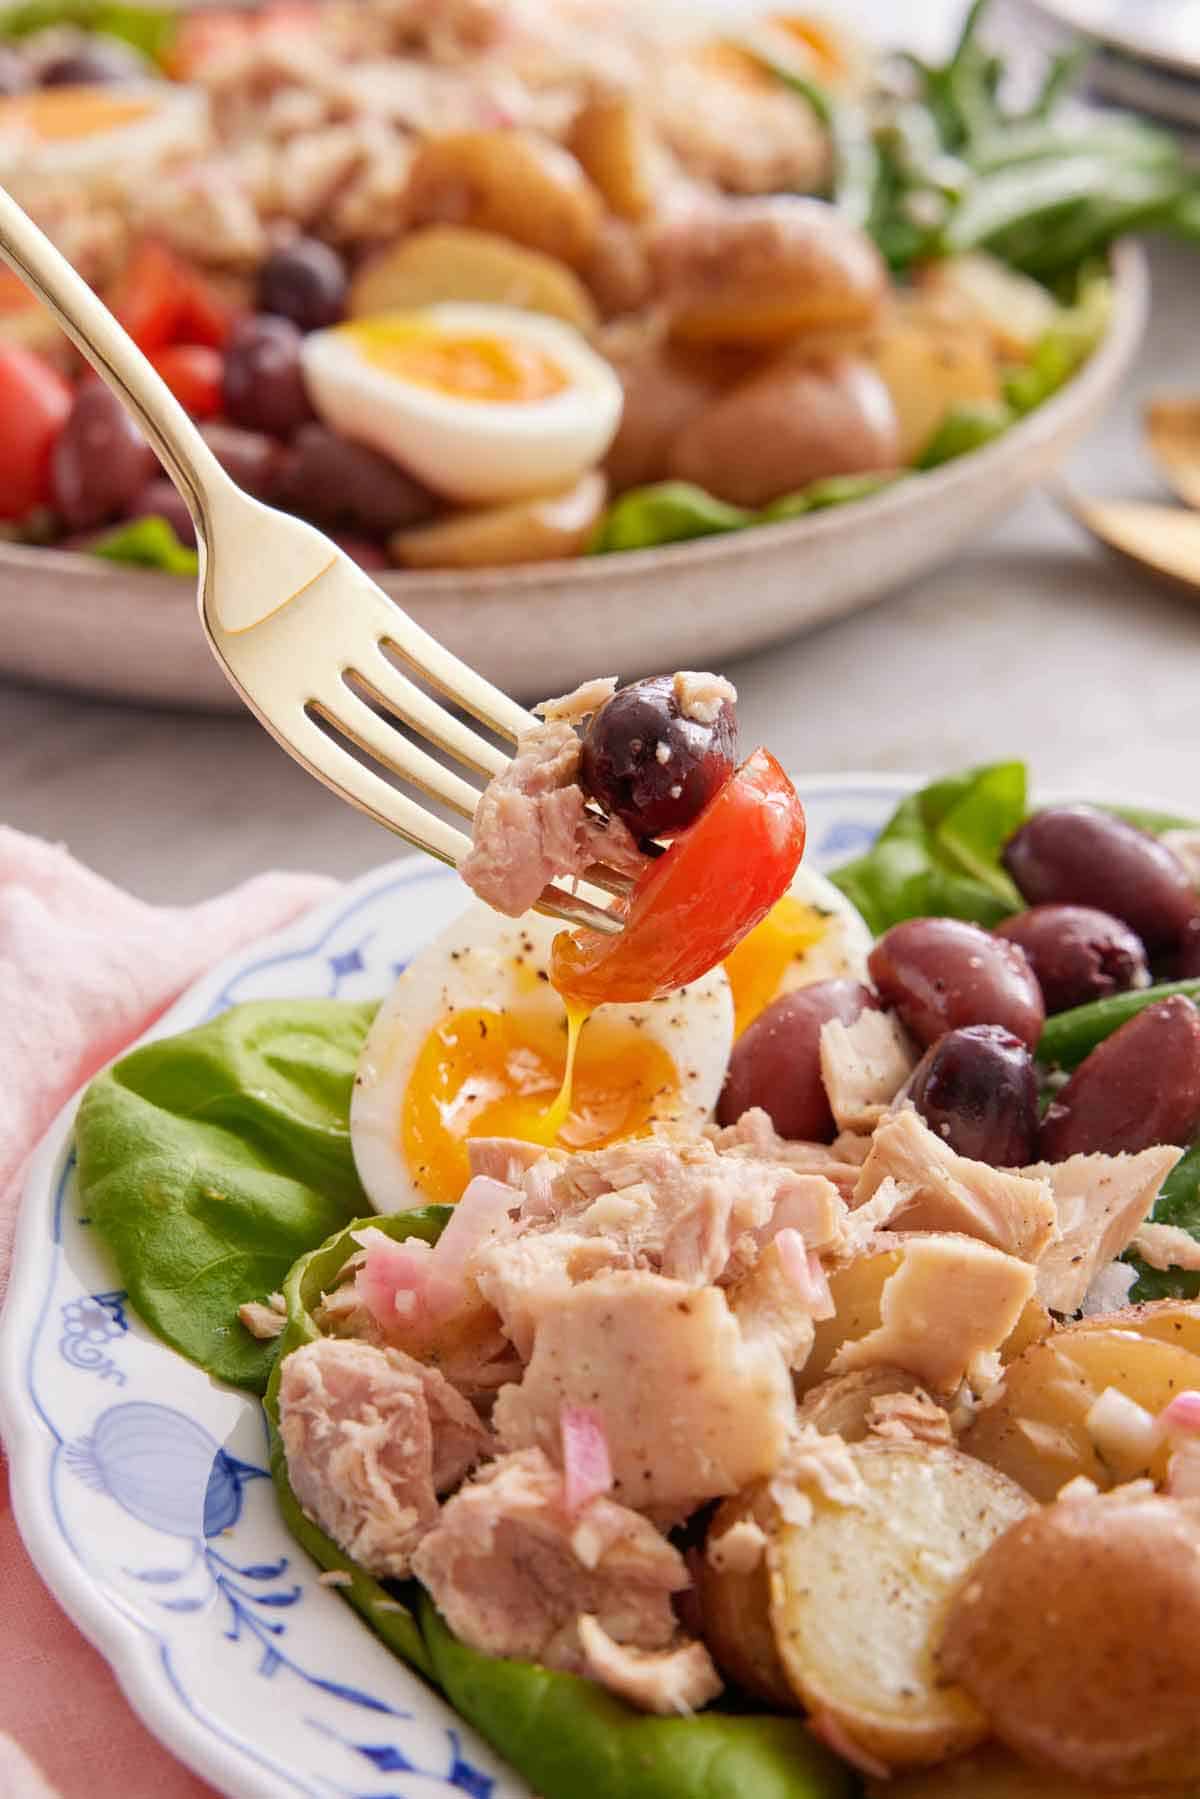 A forkful of niçoise salad lifted from a serving plate.